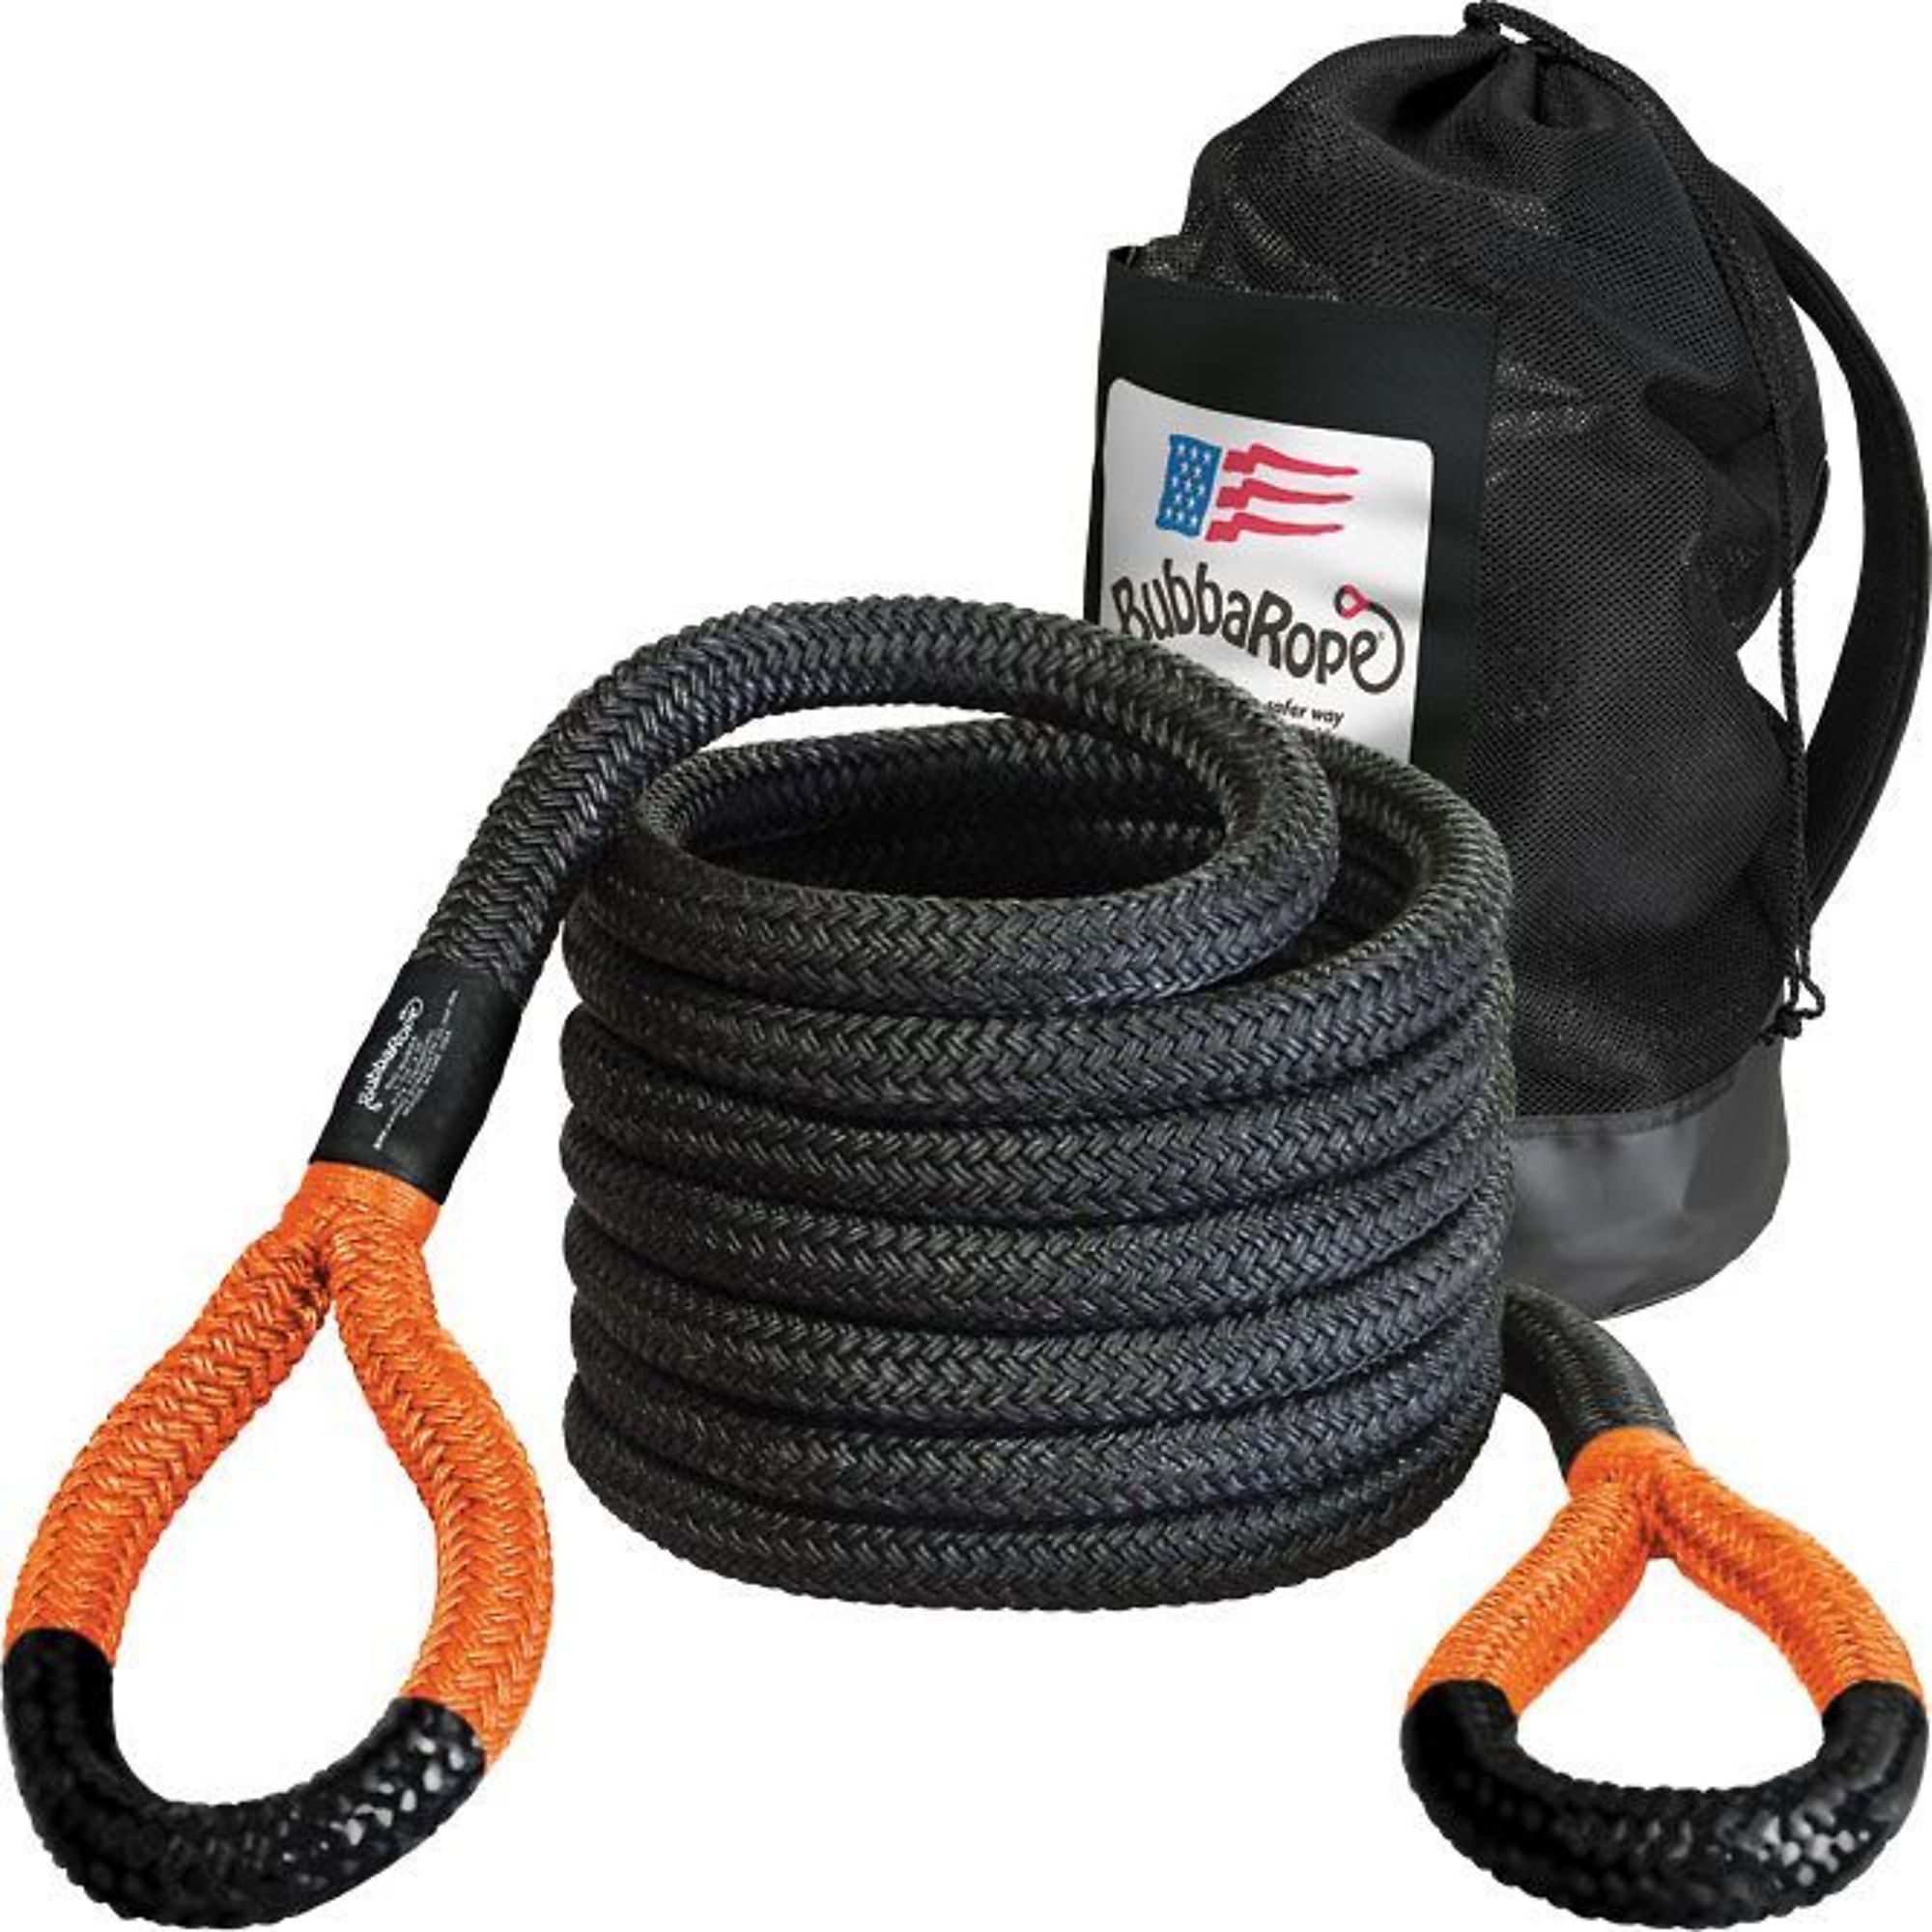 Bubba Rope, The Best Power Stretch Rope for Lrg Trucks, Length 240 in, Material HMPE, Model 176700ORG